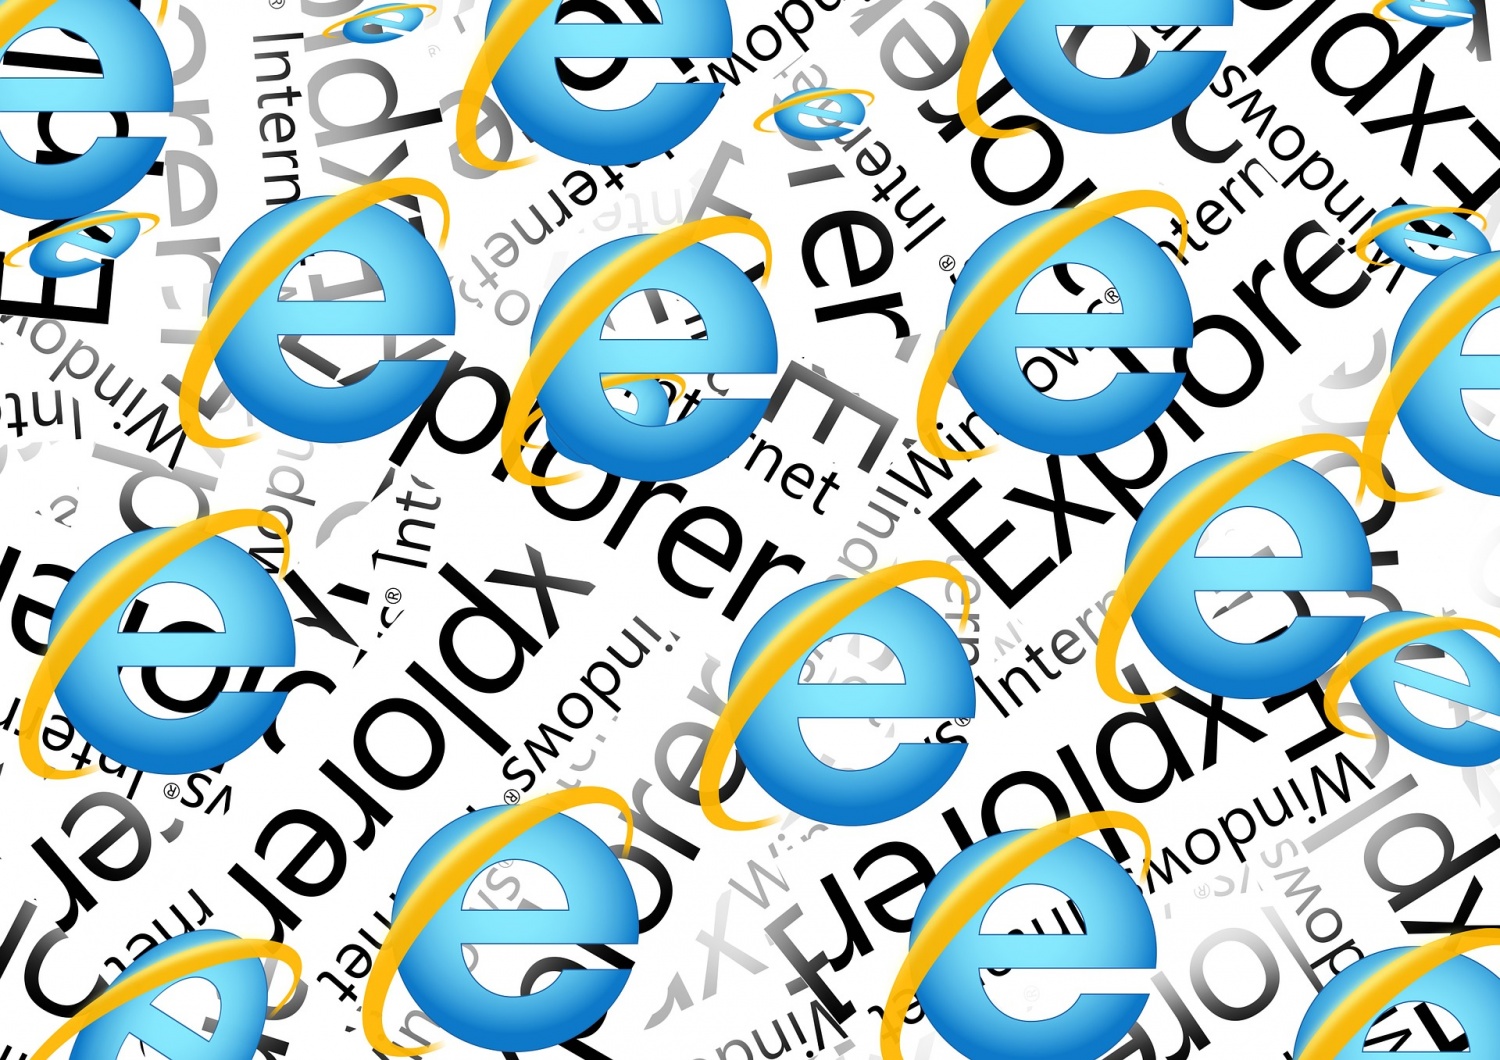 Microsoft Retires Internet Explorer after 27 Years, Should Users Switch to Edge Browser?